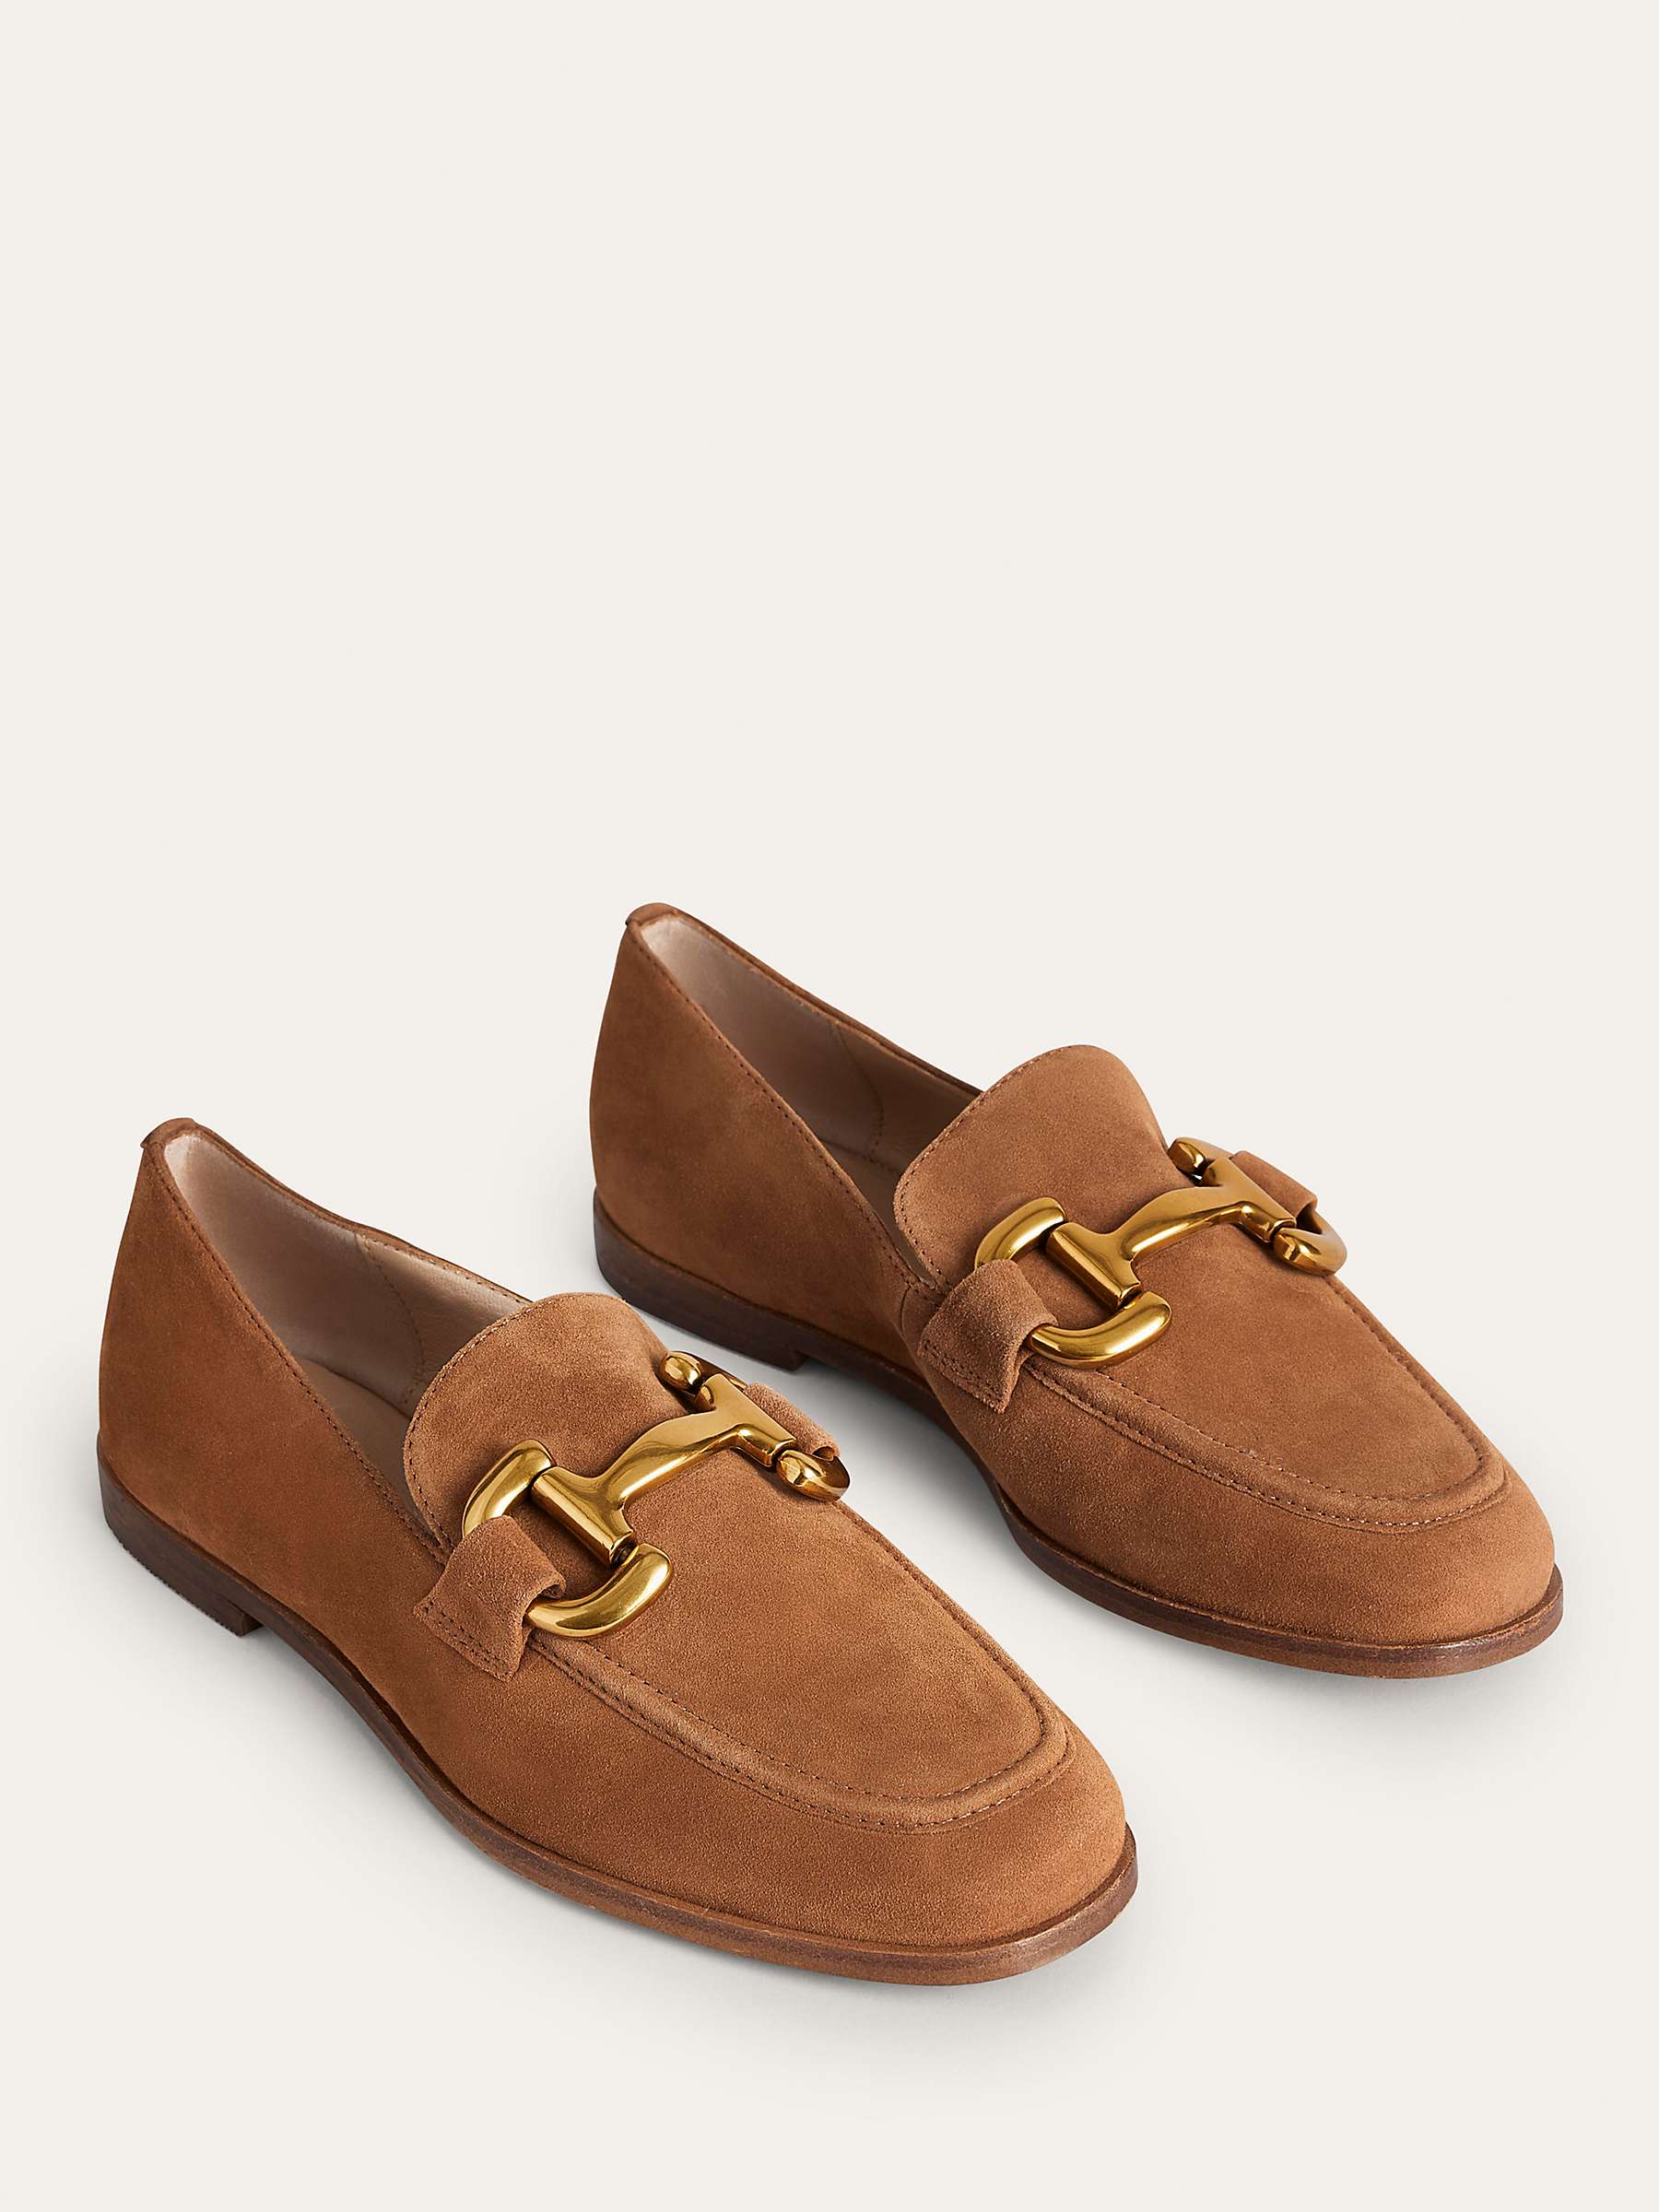 Buy Boden Iris Snaffle Suede Loafers, Ginger Snap Online at johnlewis.com